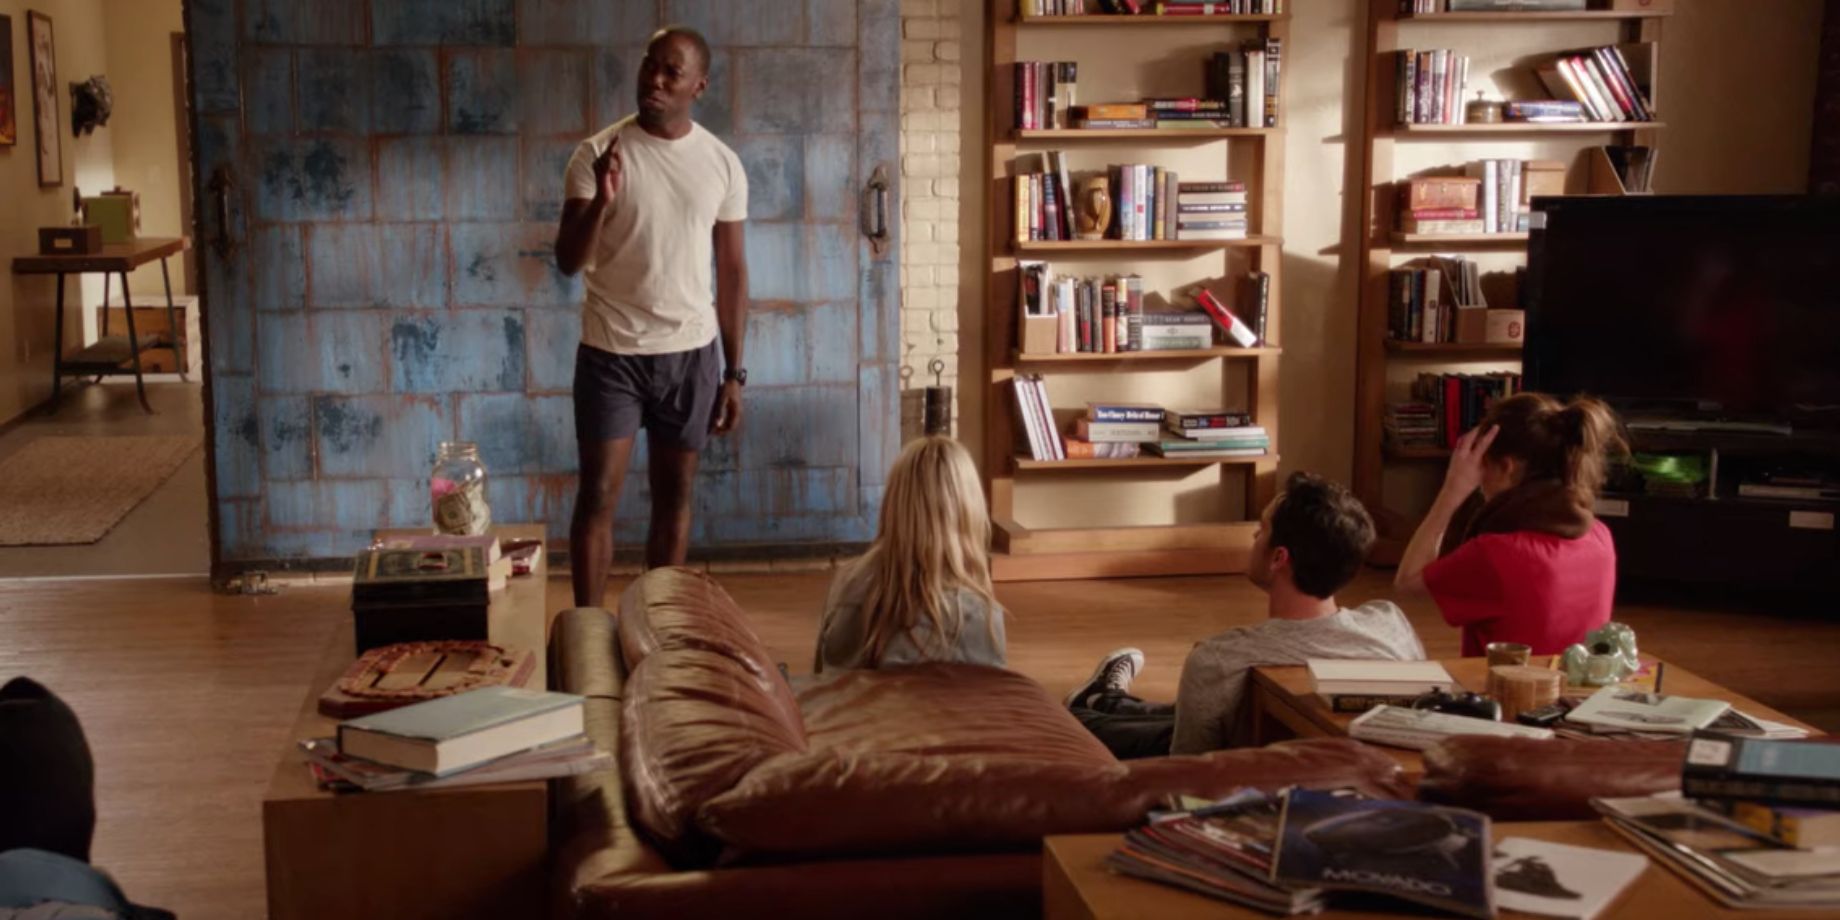 Winston gives his Theodore K. Mullins speech in front of his roommates and their guests in the living room in New Girl